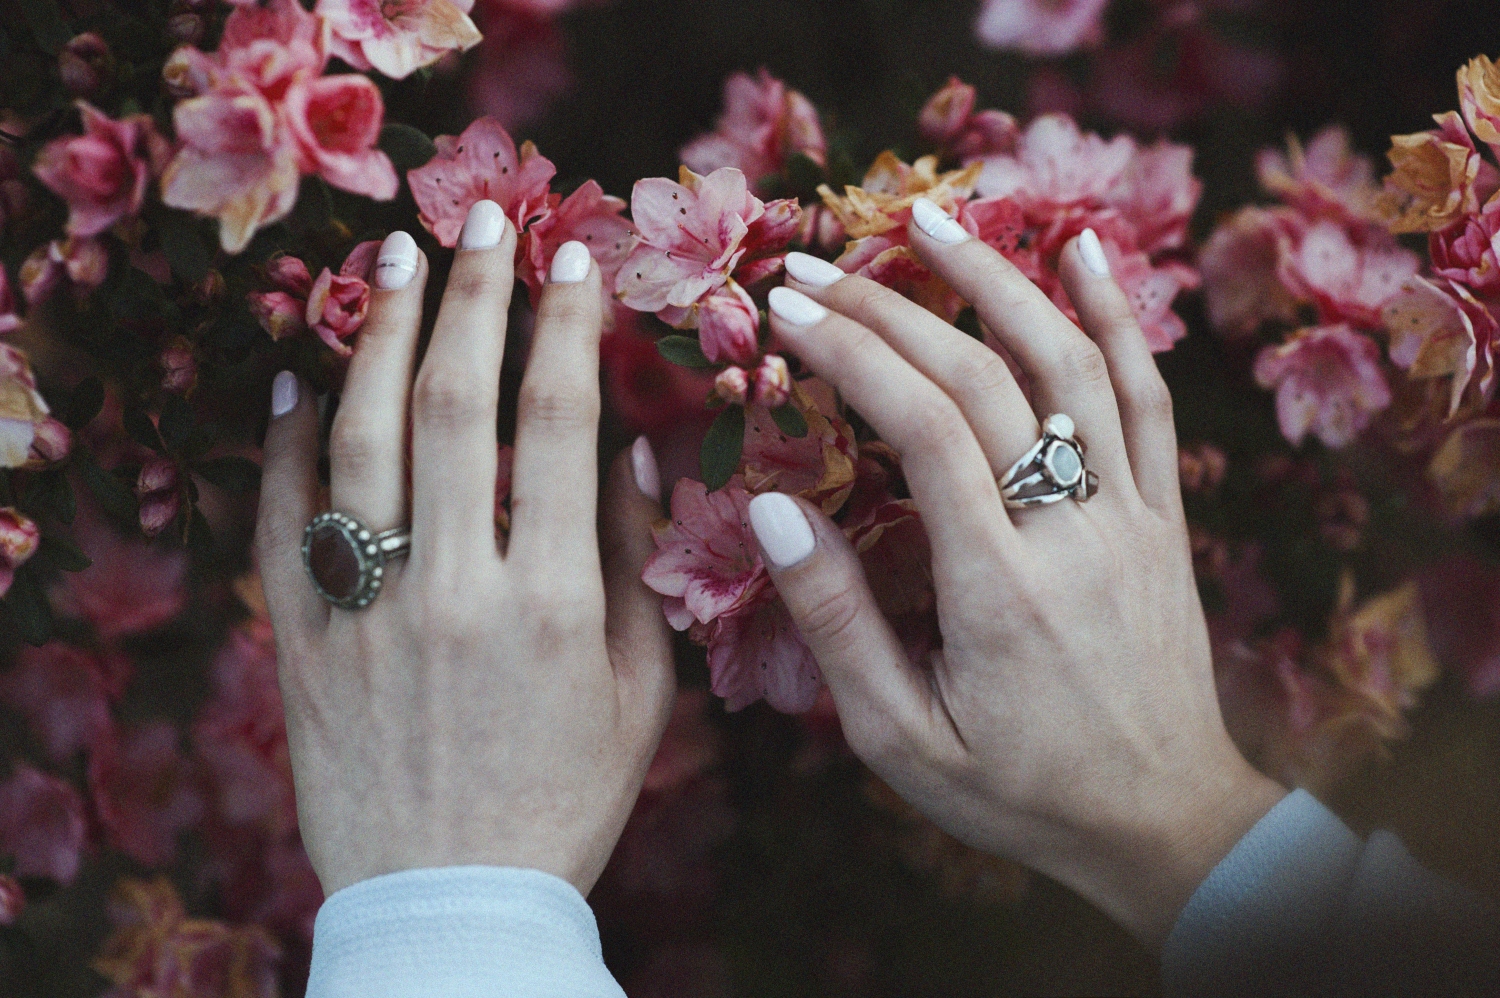 close-up image of hands with rings on the fingers